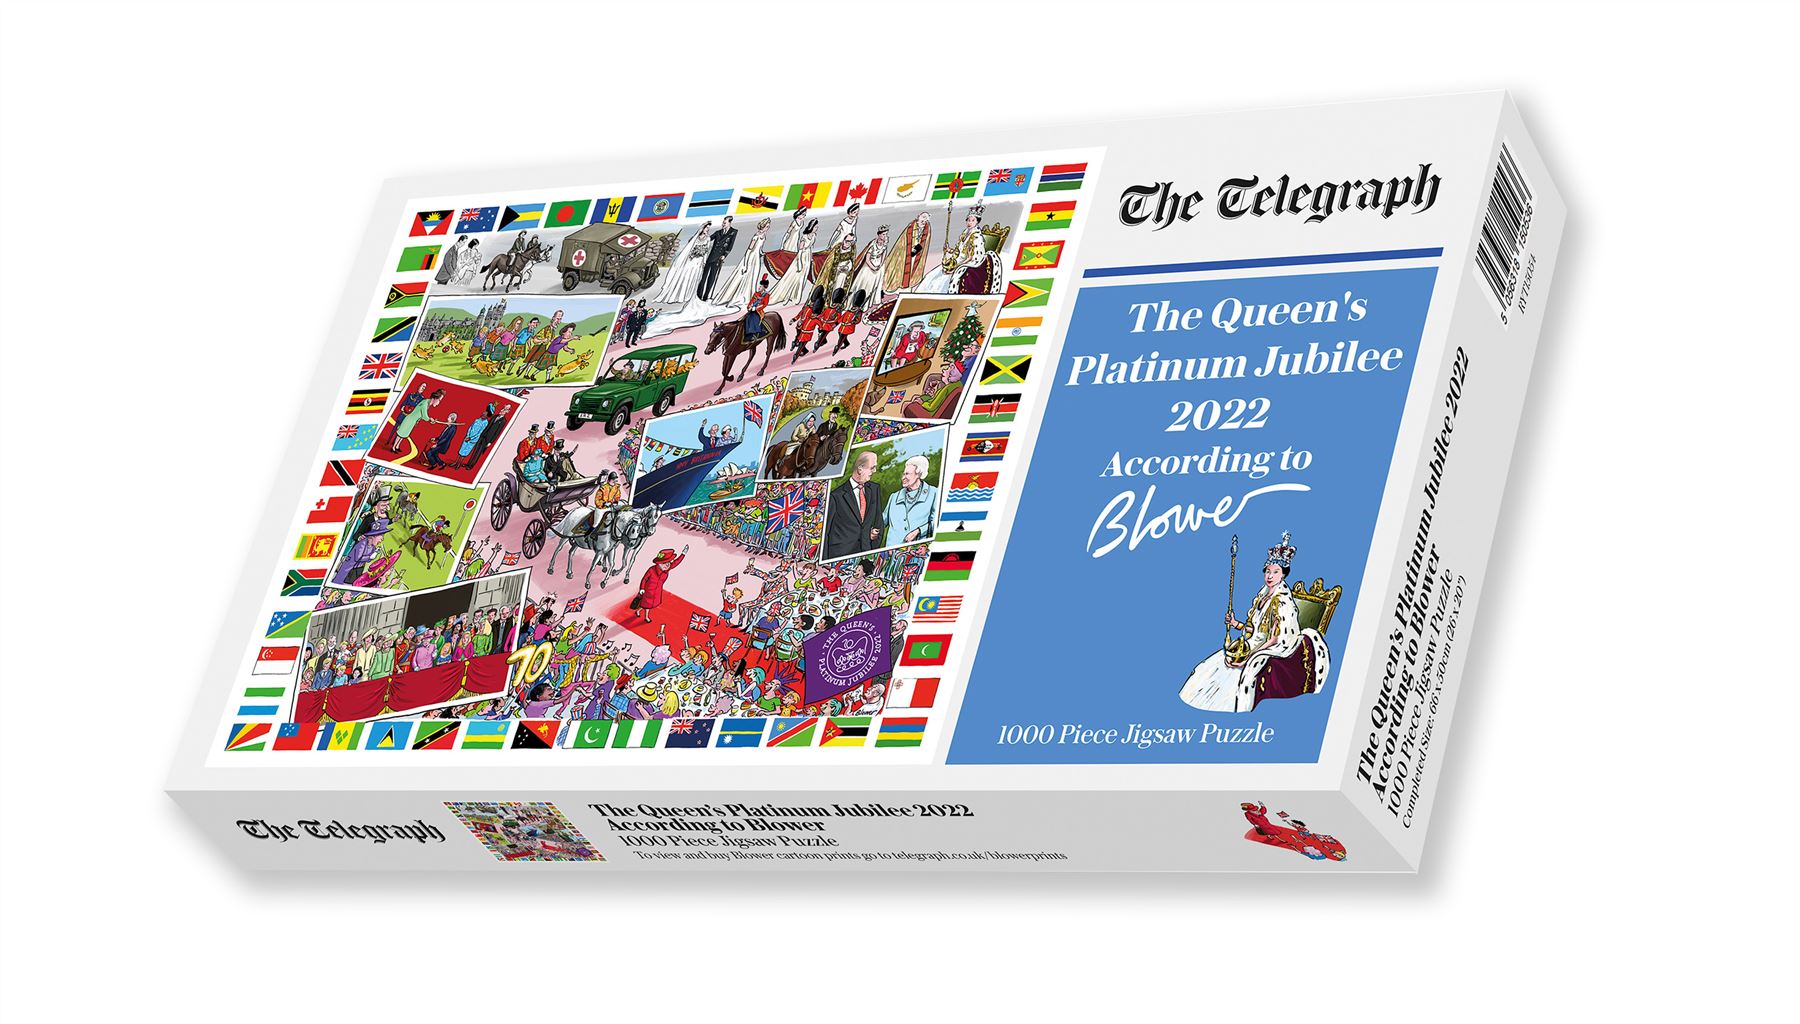 The Queen's Platinum Jubilee 2022  According to Blower Jigsaw Puzzle box